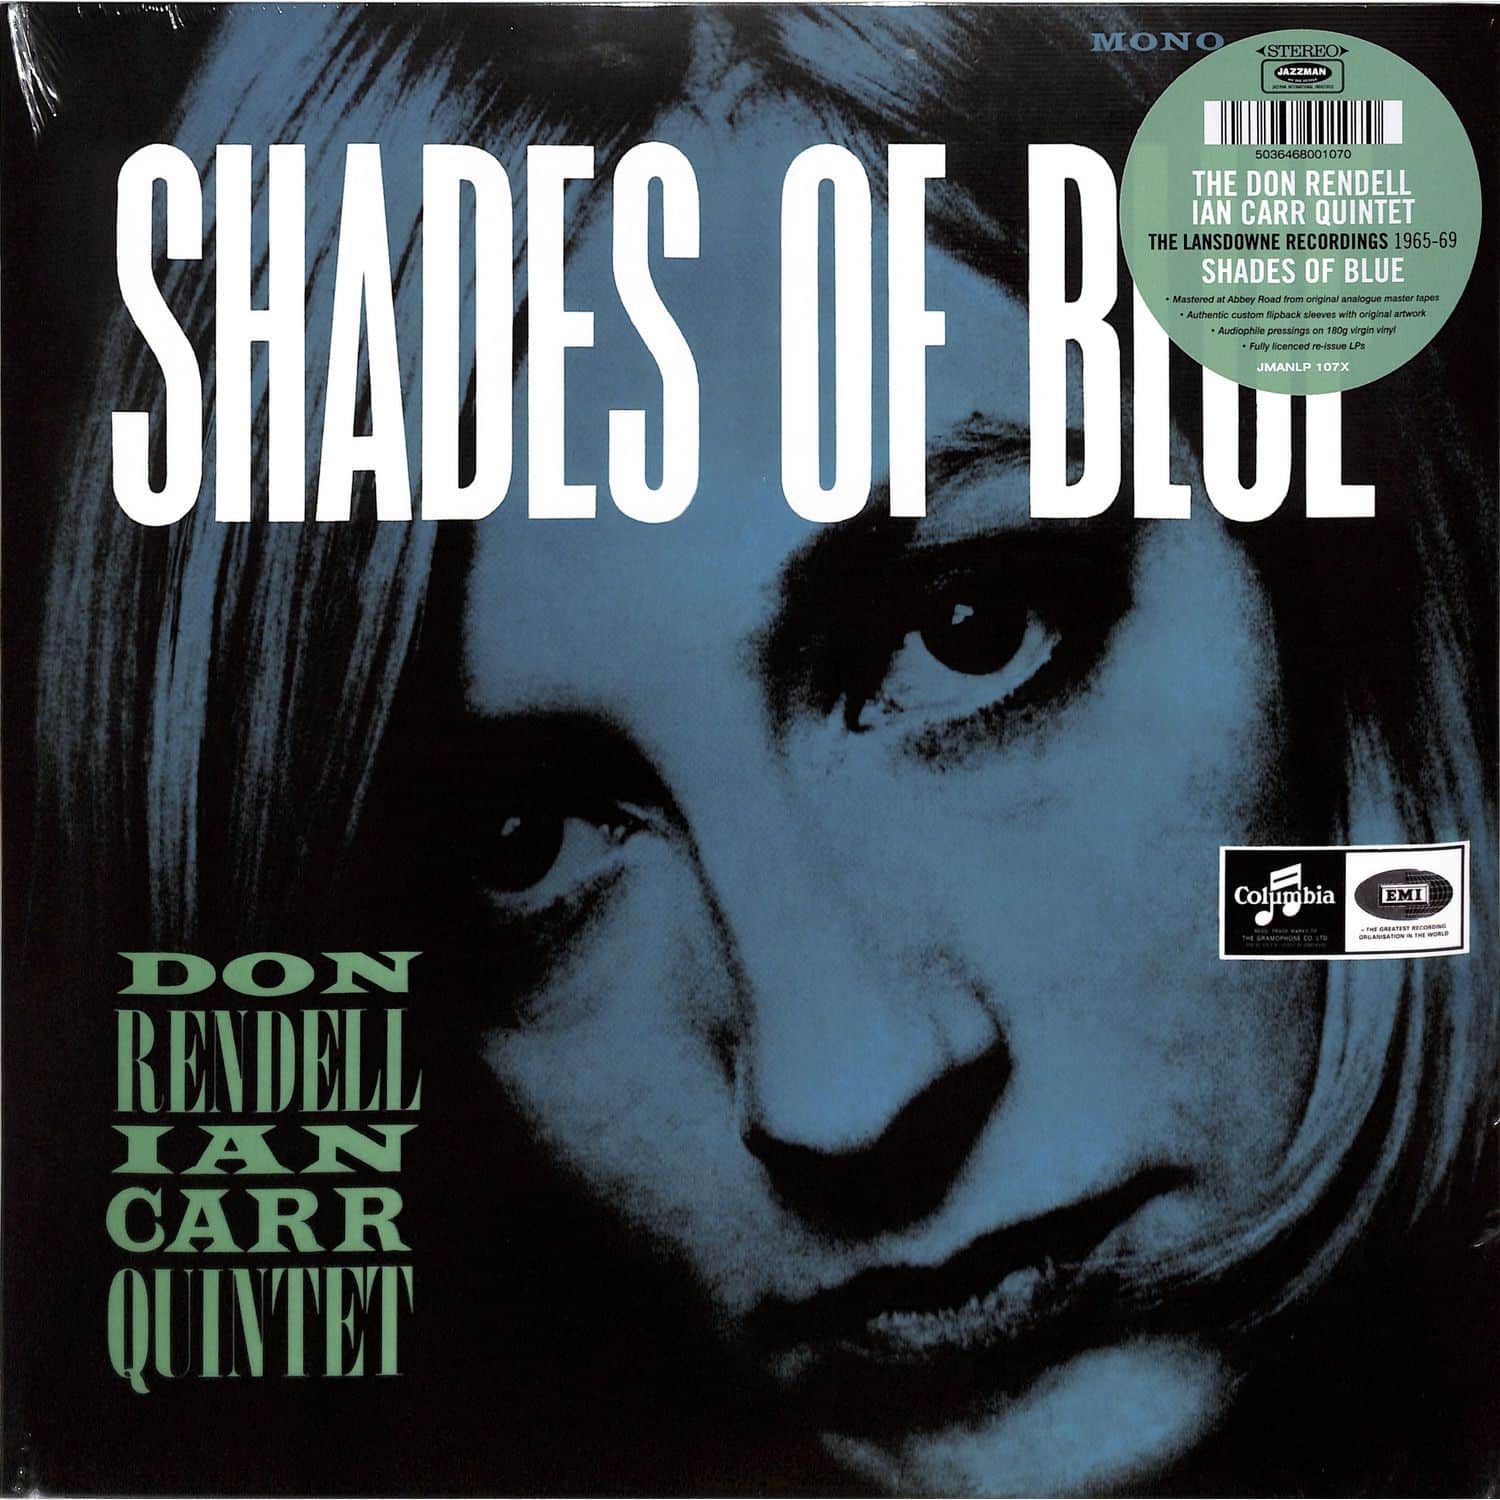 The Don Rendell / Ian Carr Quintet - SHADES OF BLUE 